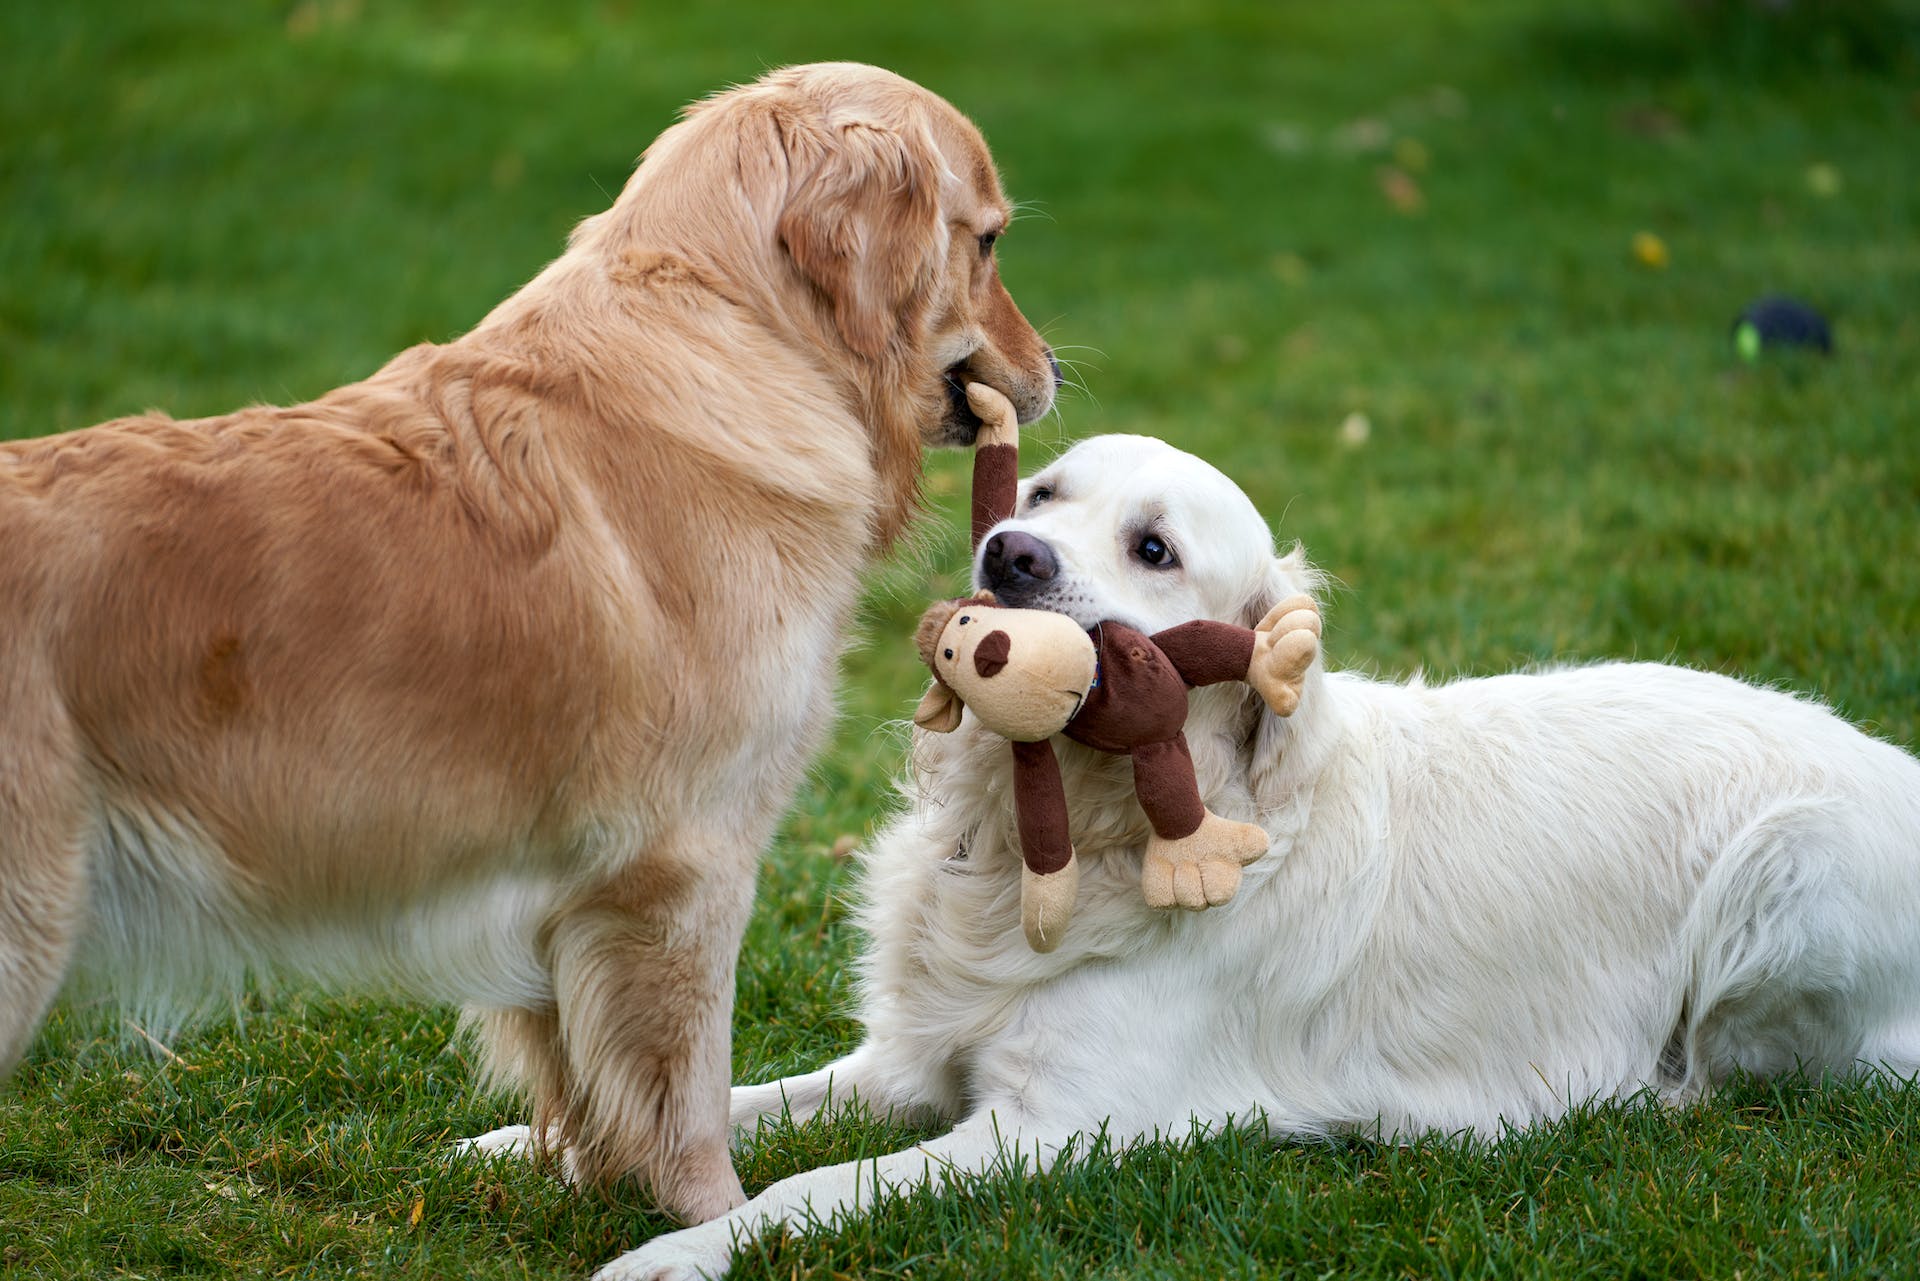 Two dogs in a lawn fighting over a stuffed toy